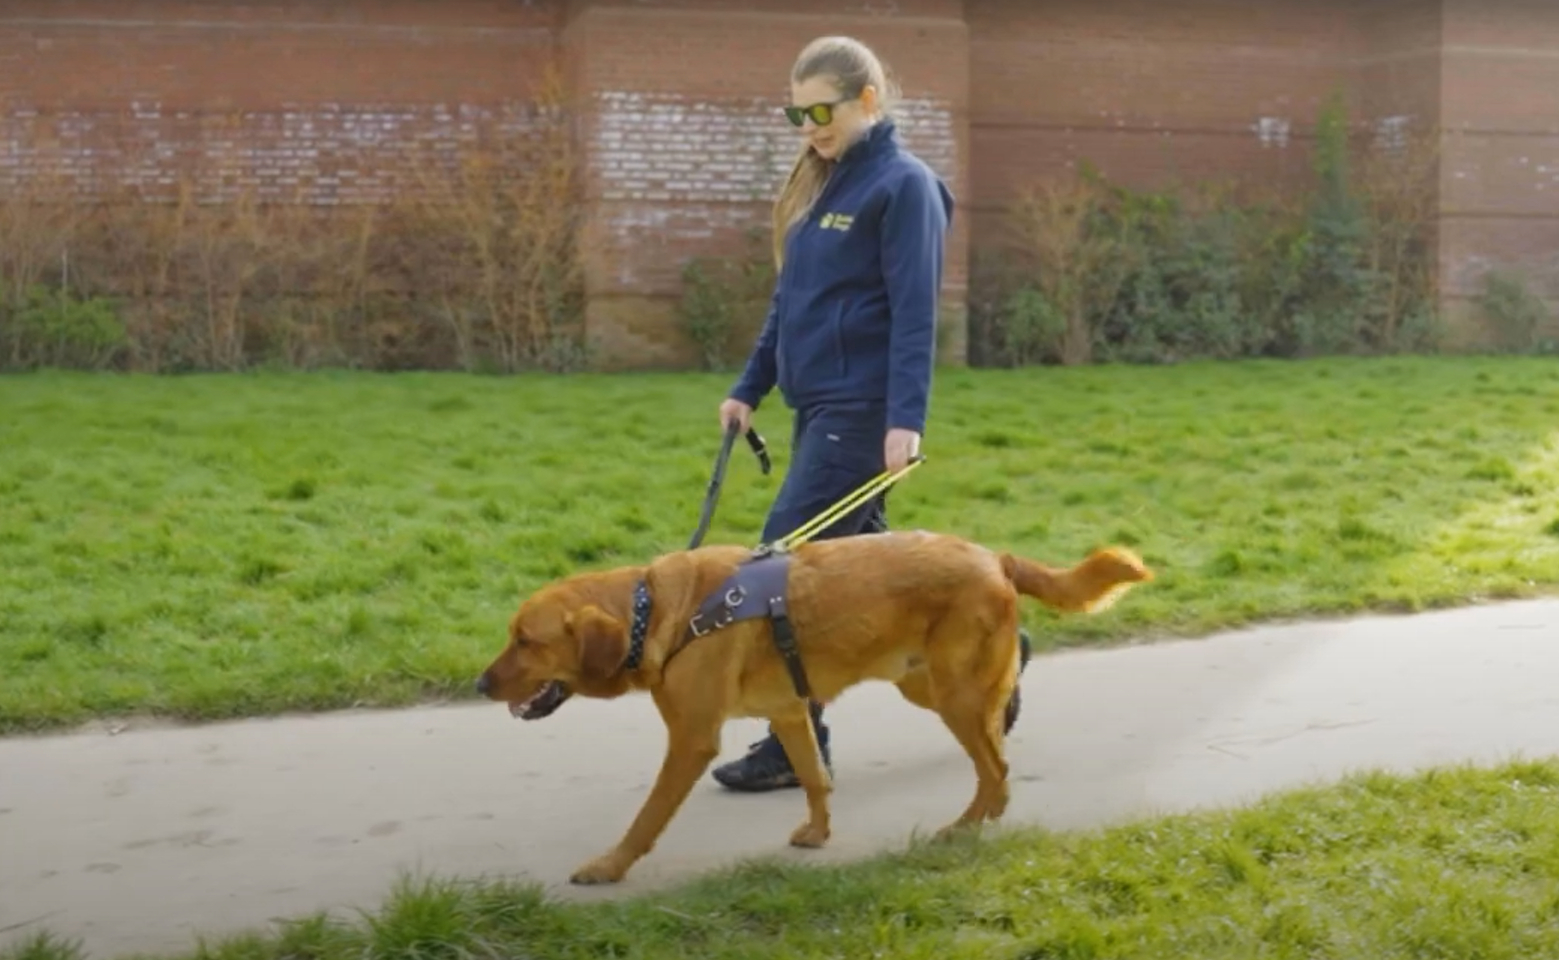 Screen shot from the Recovery in Action video, showing a side view of a Guide Dog Mobility Specialist walking along a path with a guide dog in training.